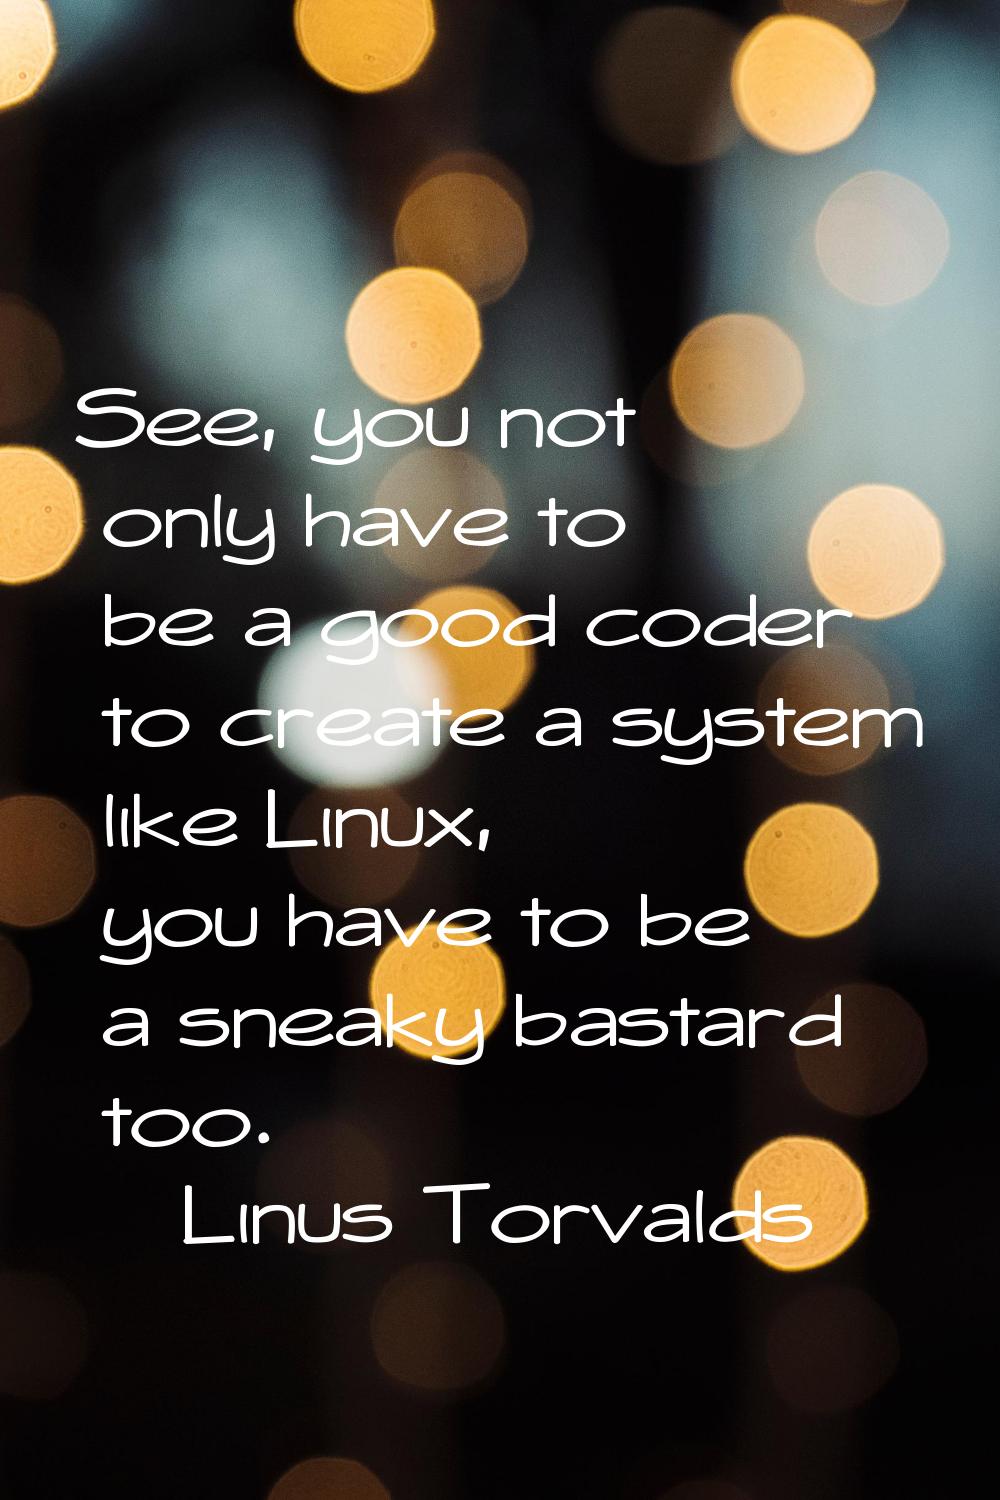 See, you not only have to be a good coder to create a system like Linux, you have to be a sneaky ba